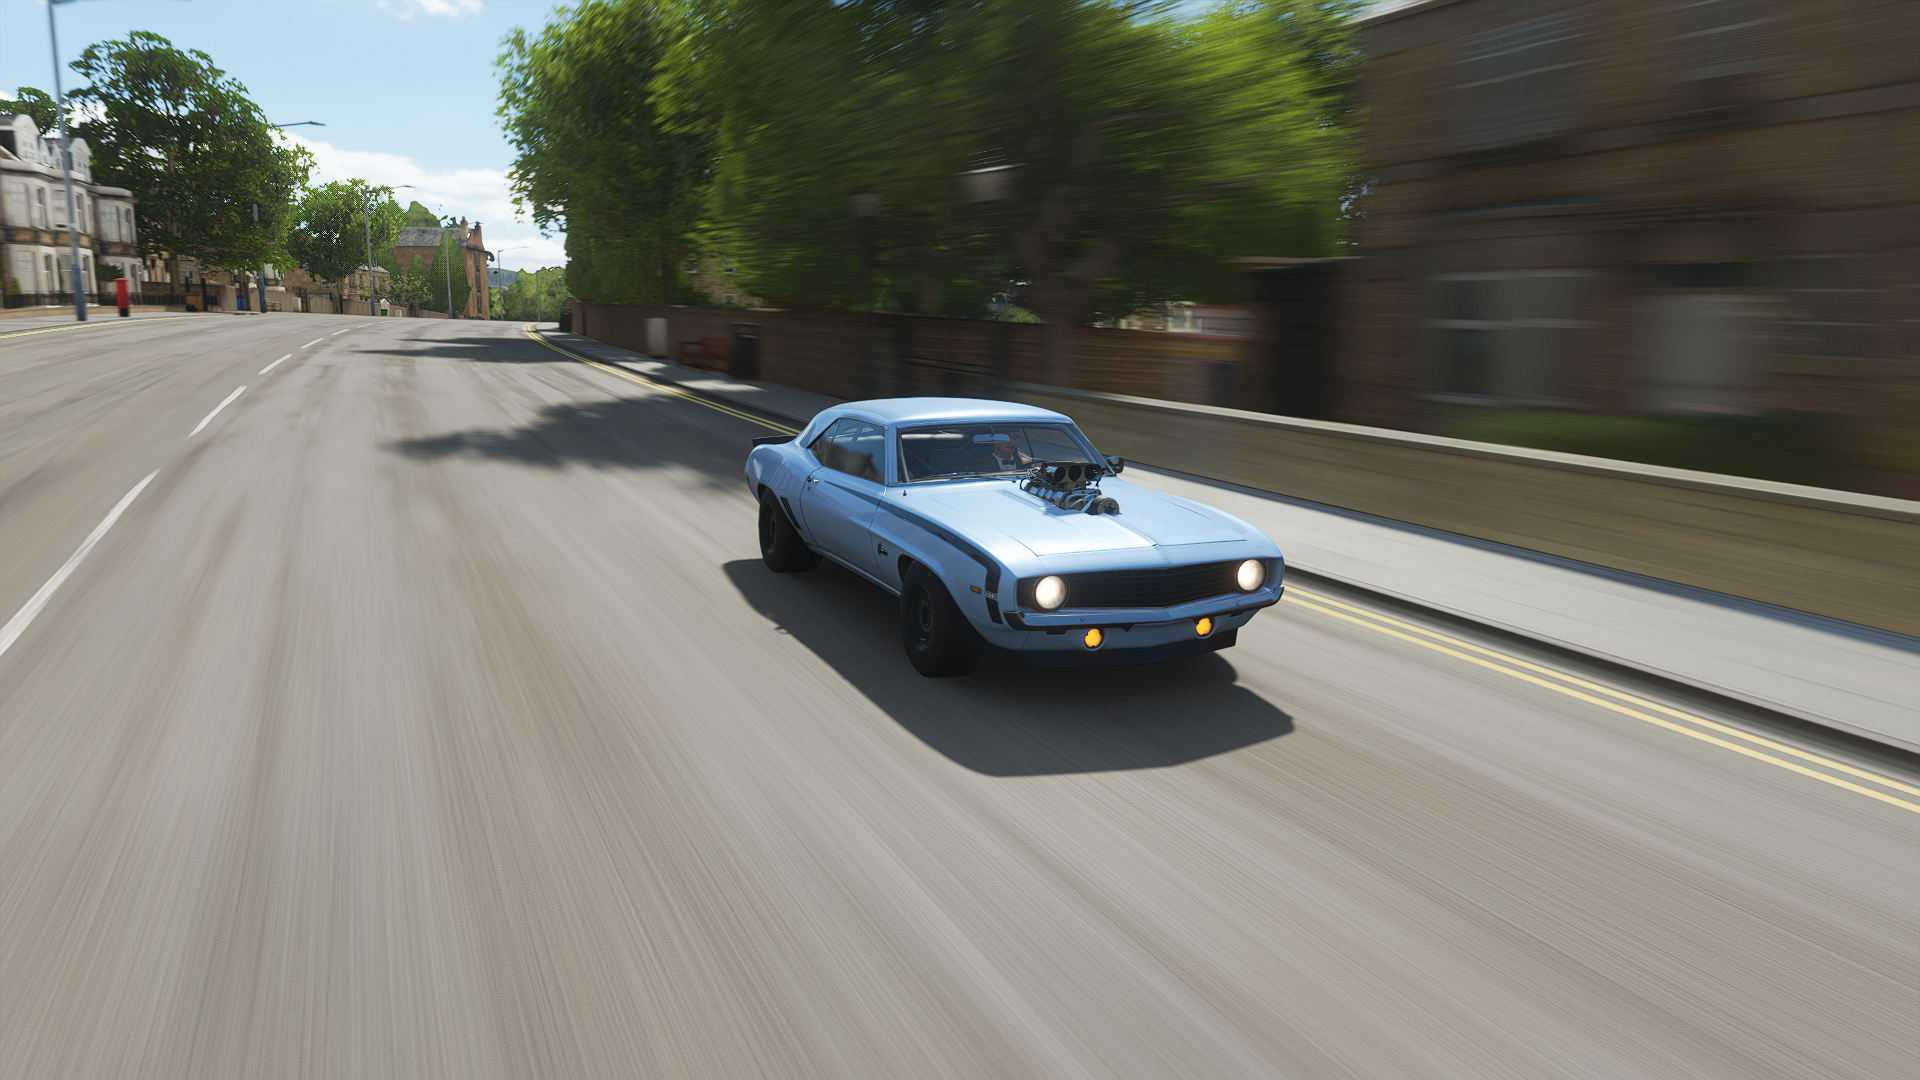 General 1920x1080 Forza Forza Horizon Forza Horizon 4 racing car CGI 1969 Chevrolet Camaro SS road video games frontal view headlights trees blurred blurry background sky clouds Chevrolet PlaygroundGames muscle cars American cars